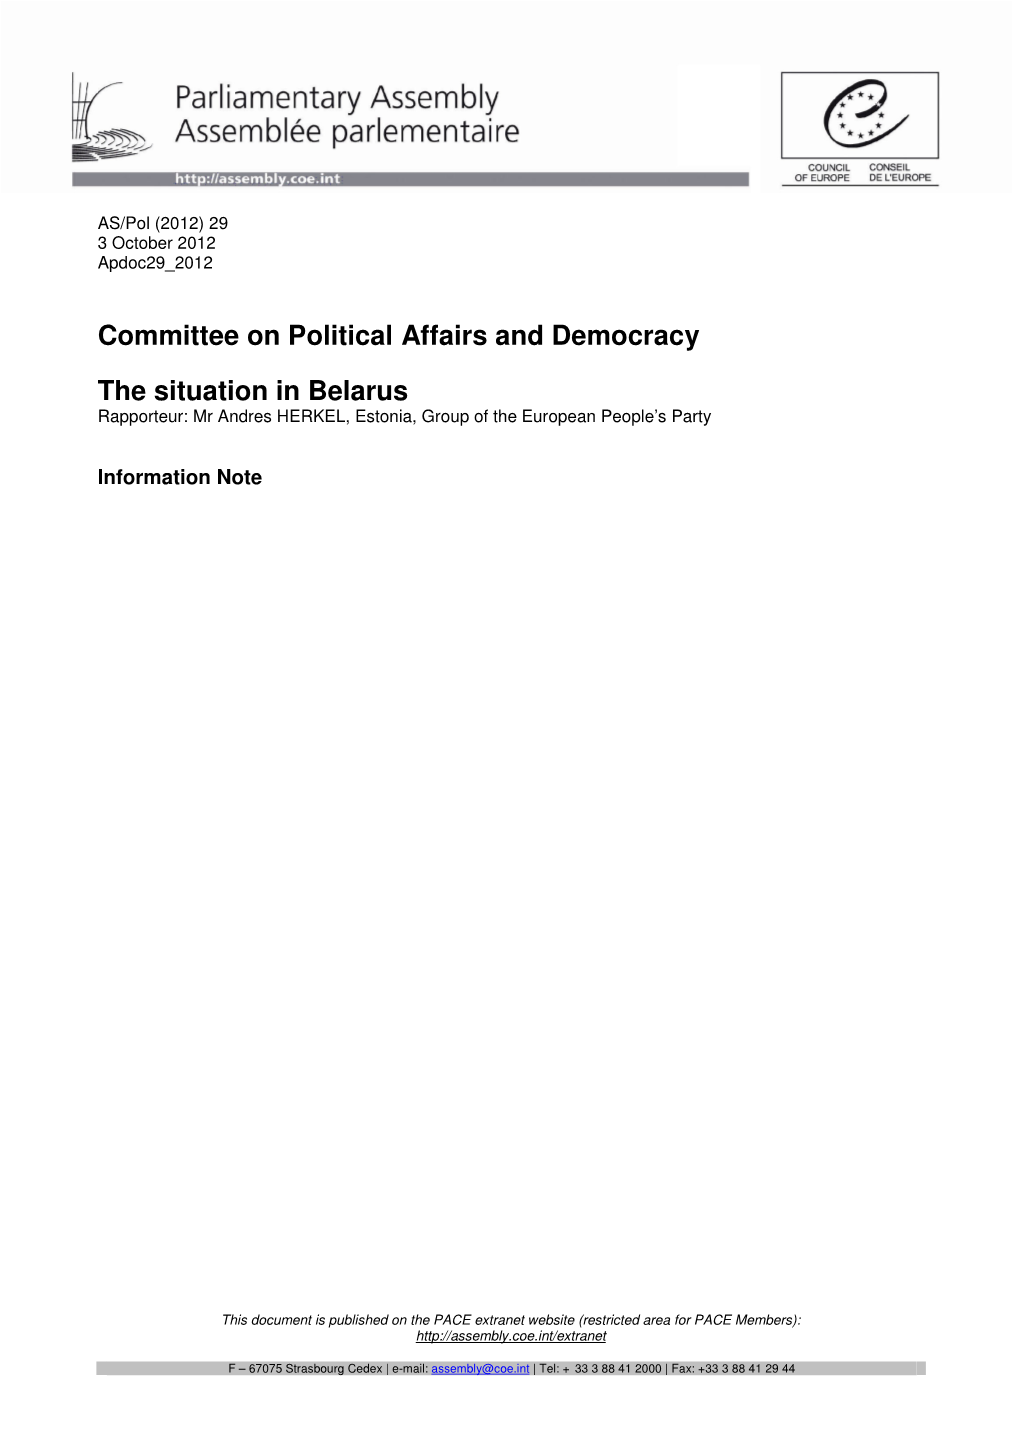 Committee on Political Affairs and Democracy the Situation in Belarus